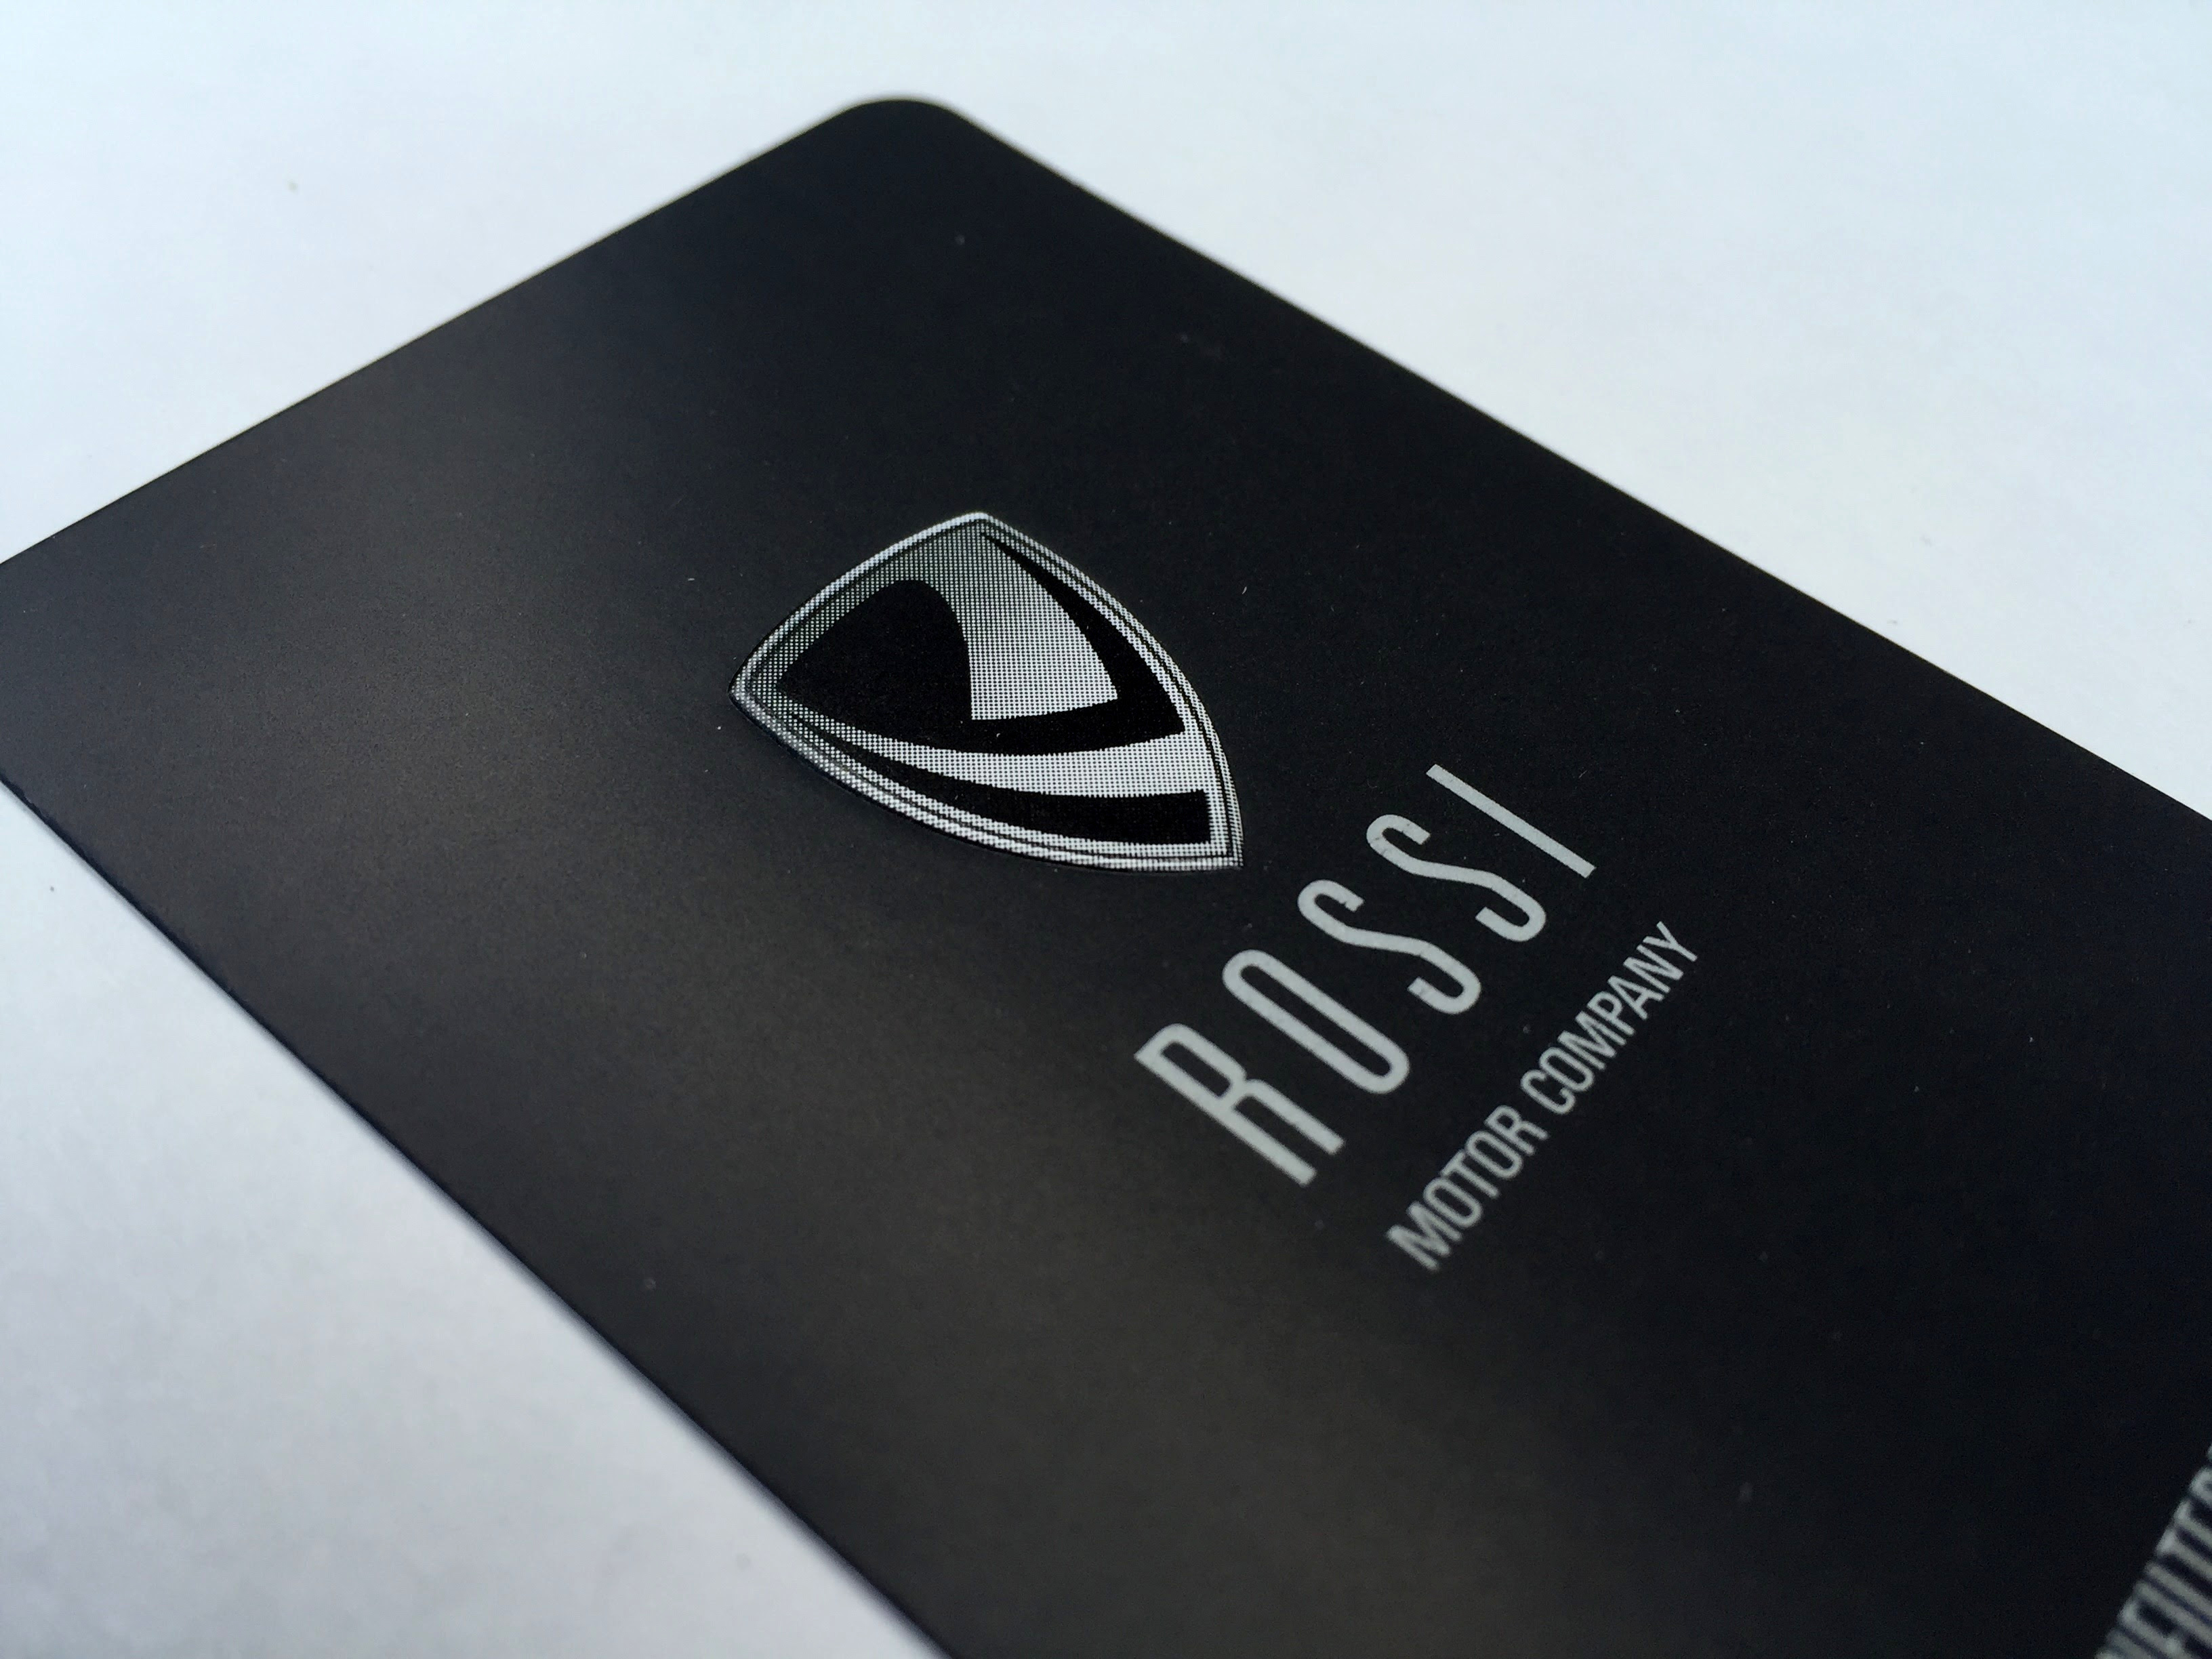 Embossed printing on a business card